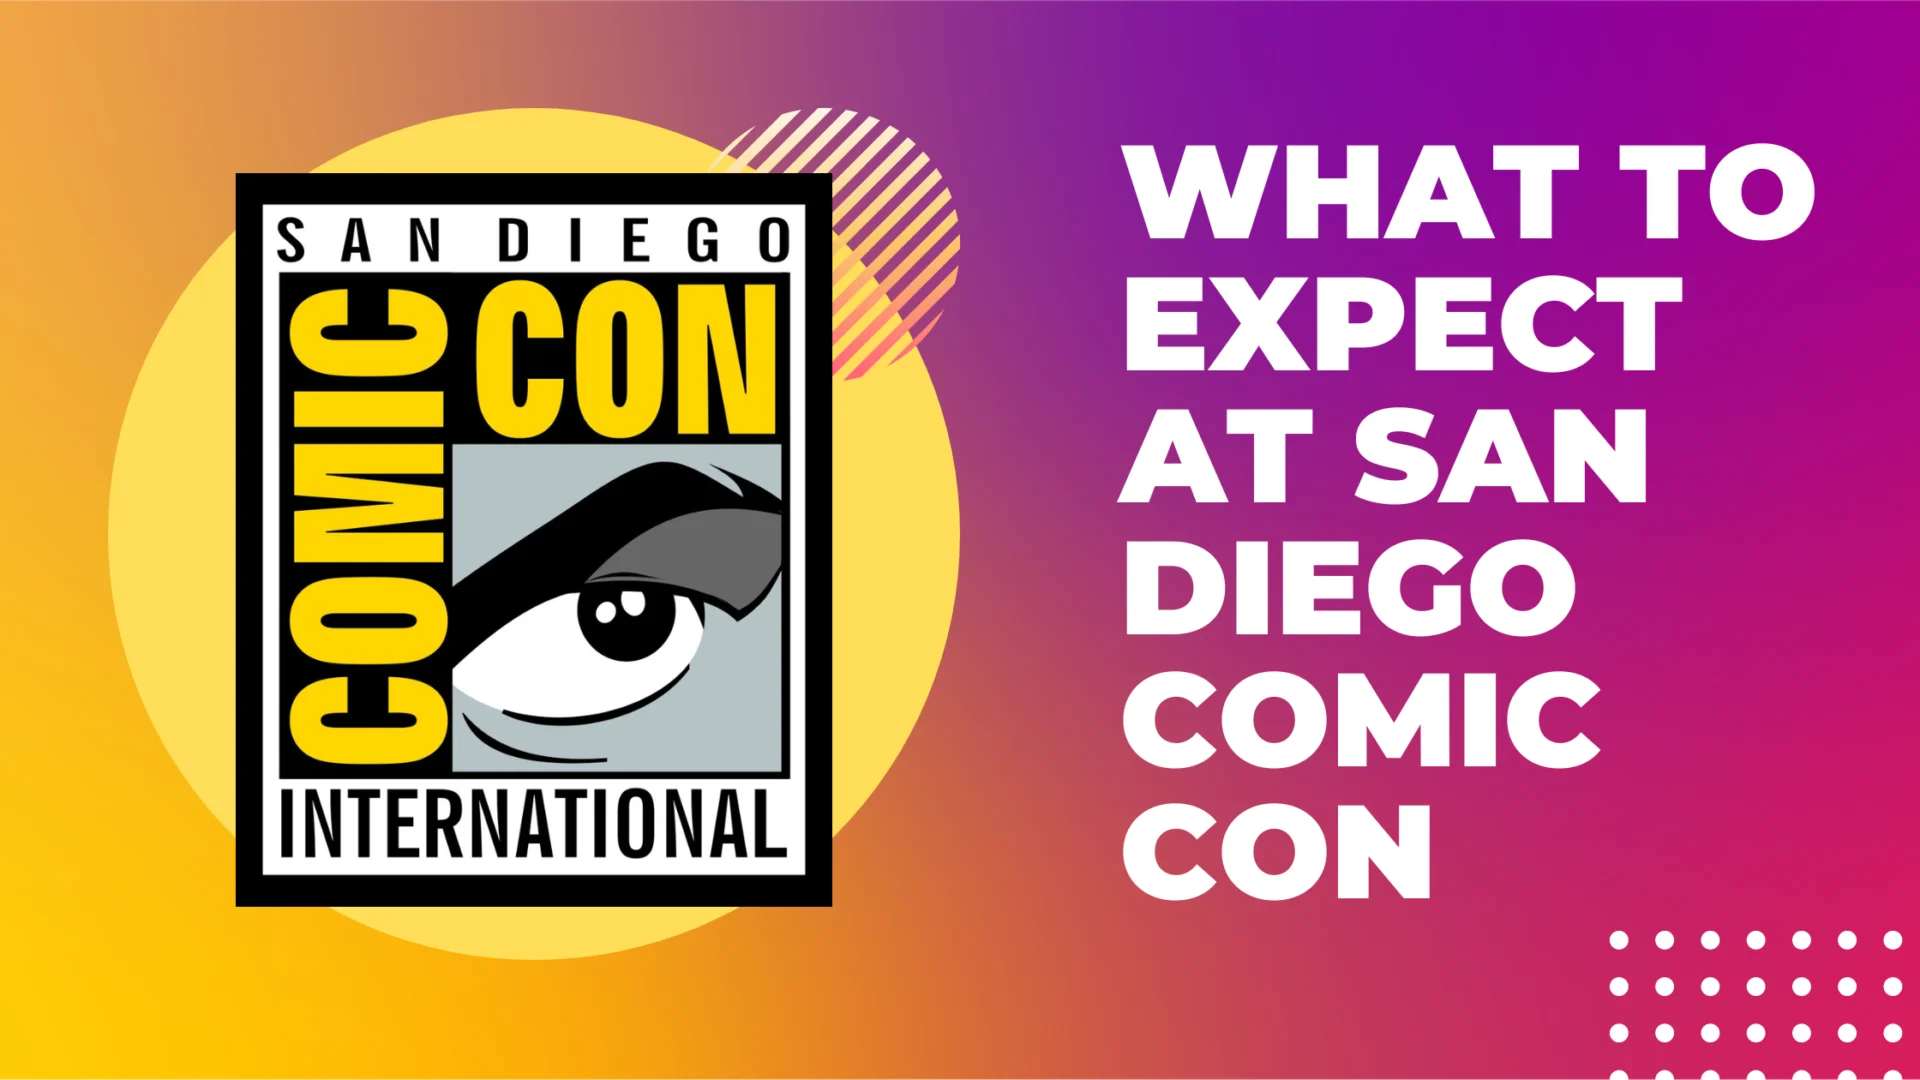 What to Expect at San Diego Comic Con